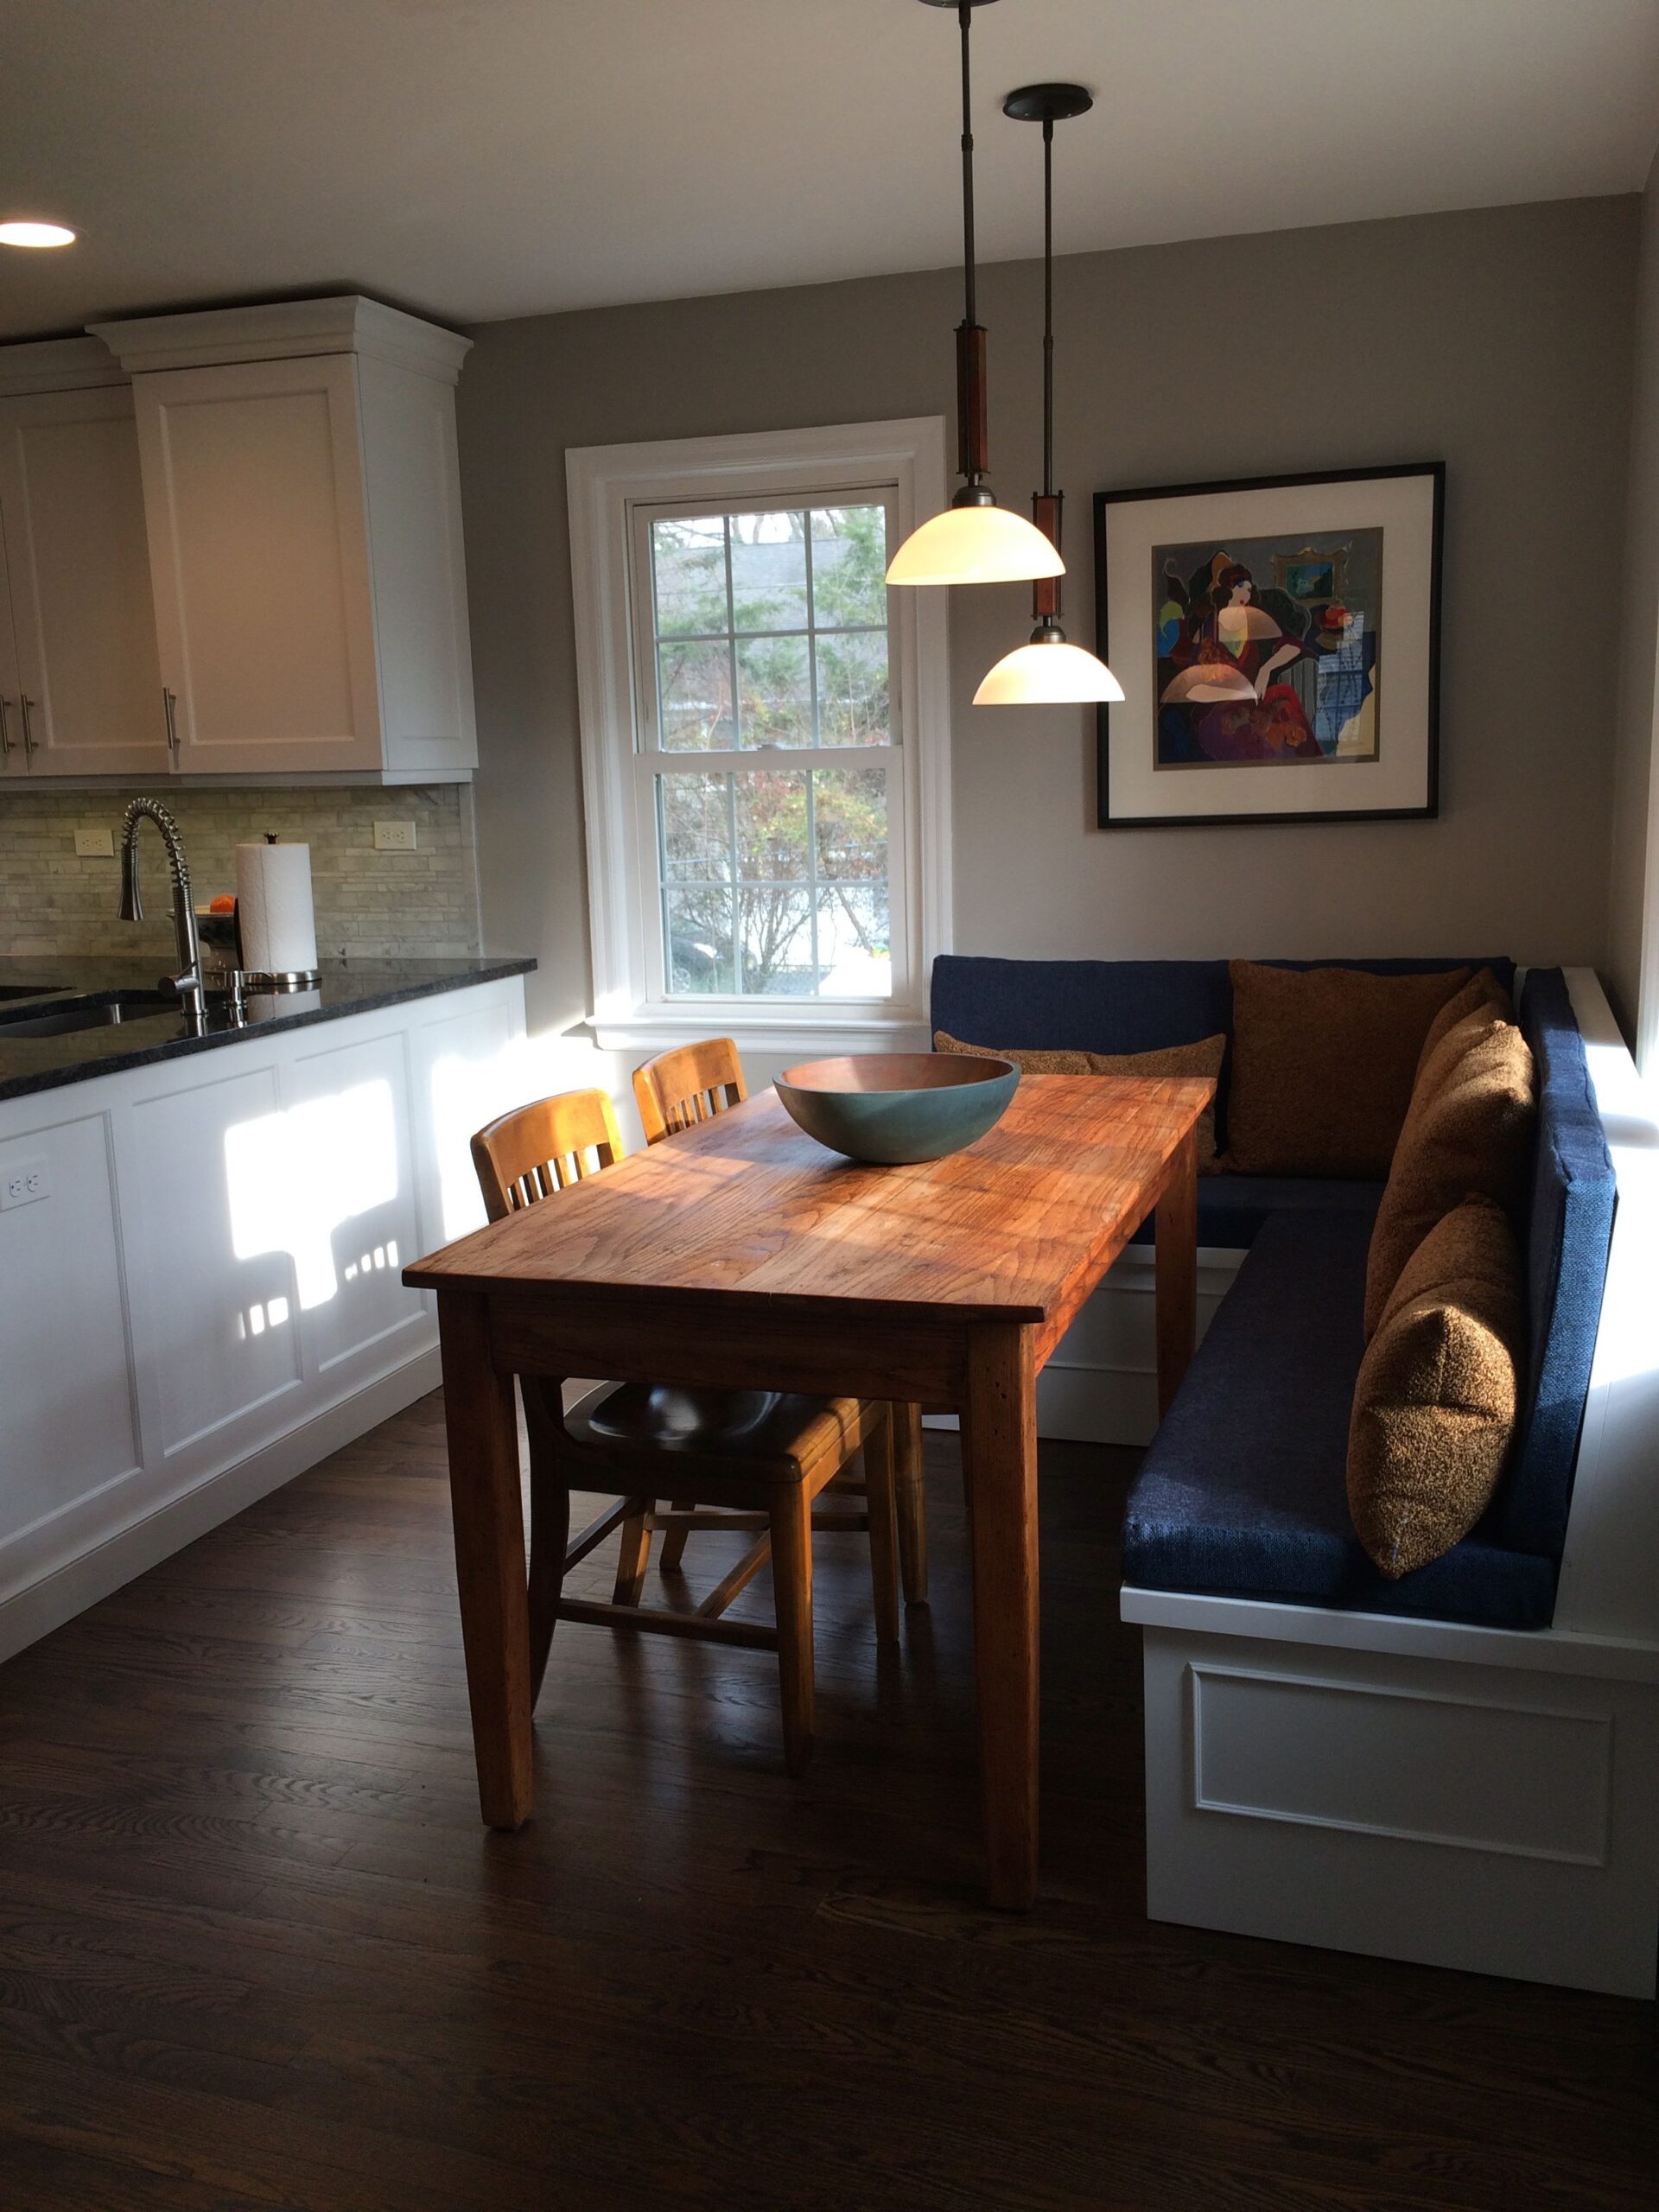 Kitchen Table With Bench